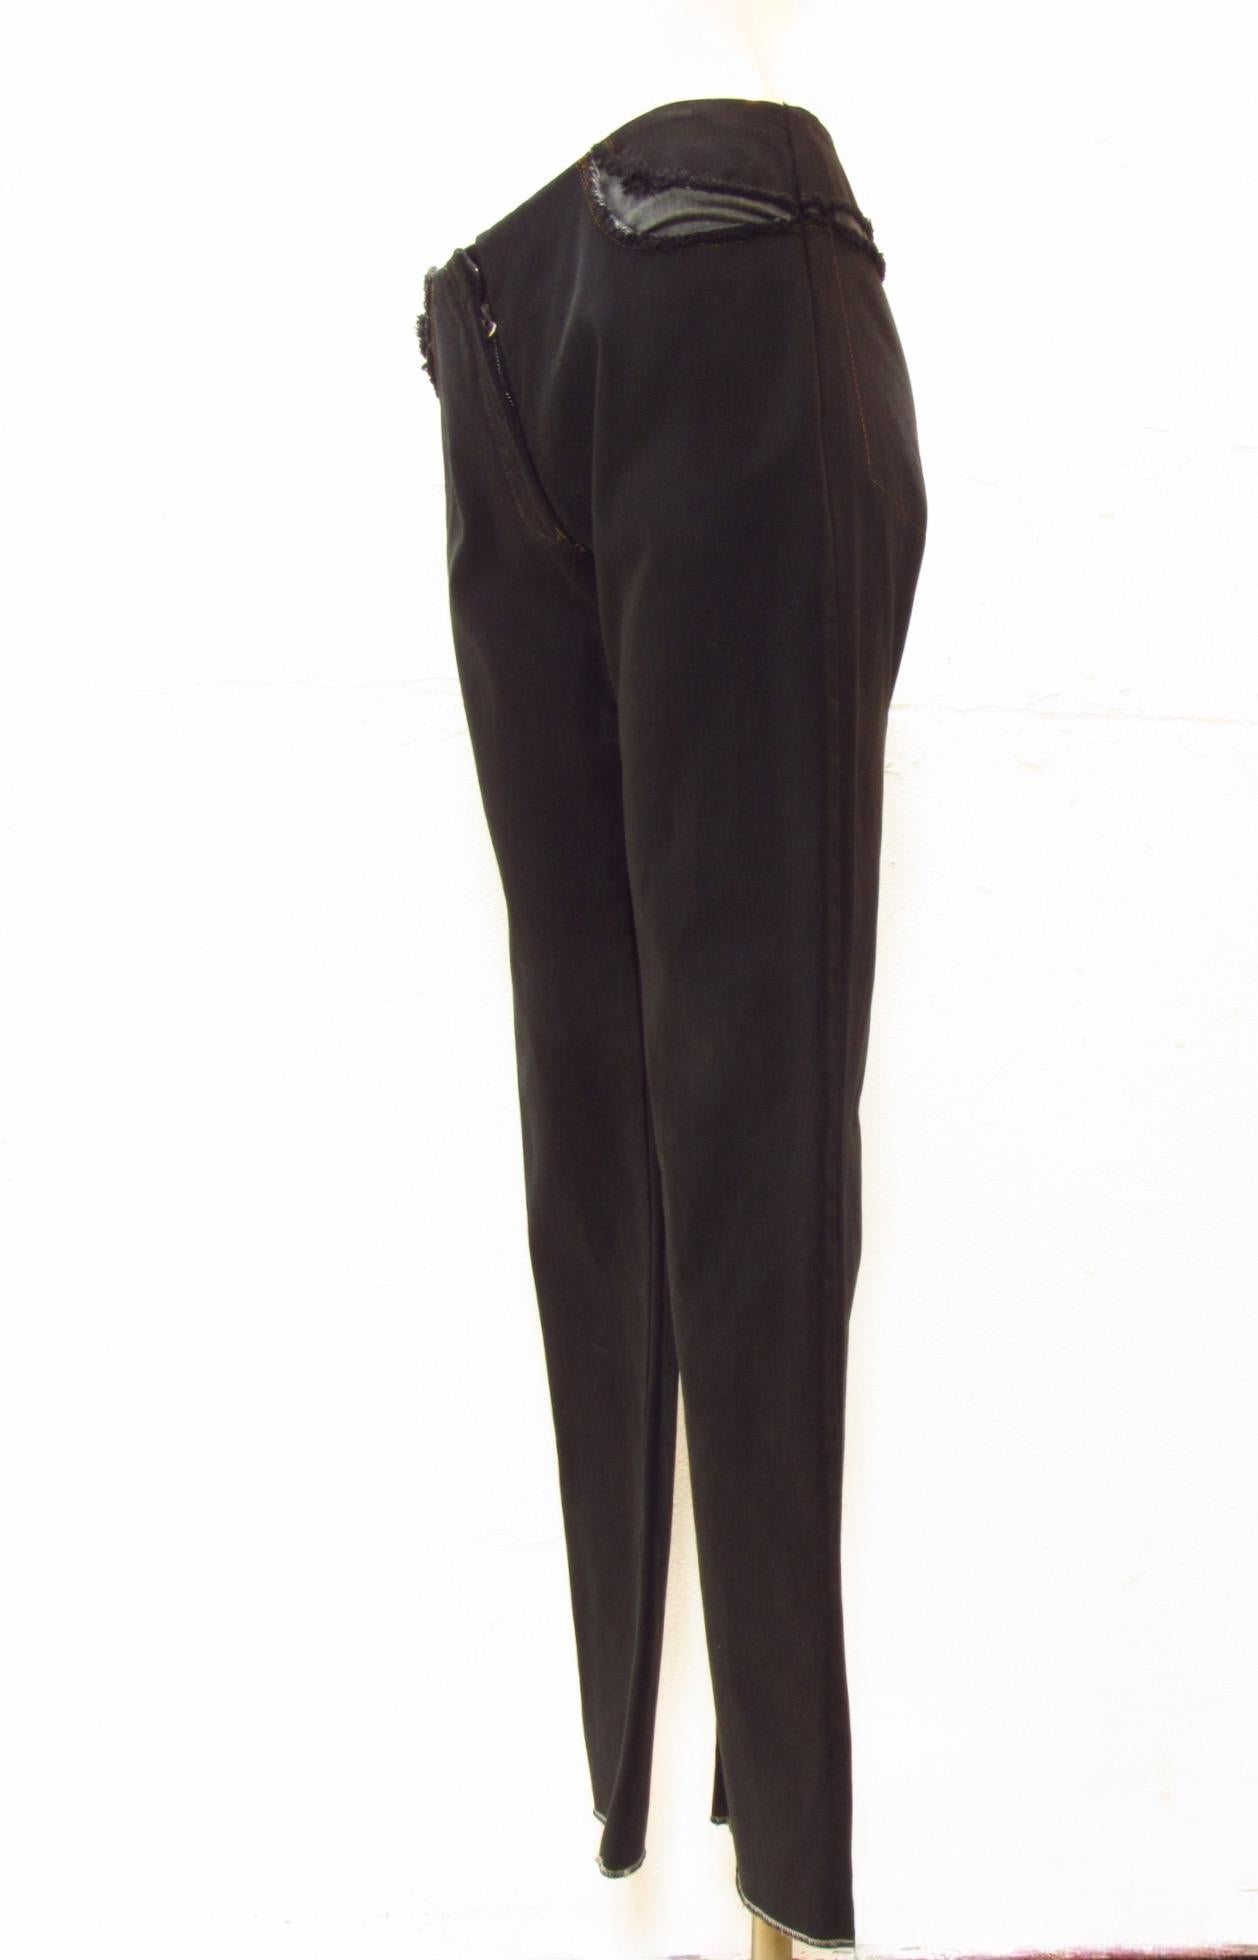 Black pants from vintage Maison Martin Margiela are unique with exposed denim seams along the waist at the pocket openings. Clean front with a short zip fly in front. 